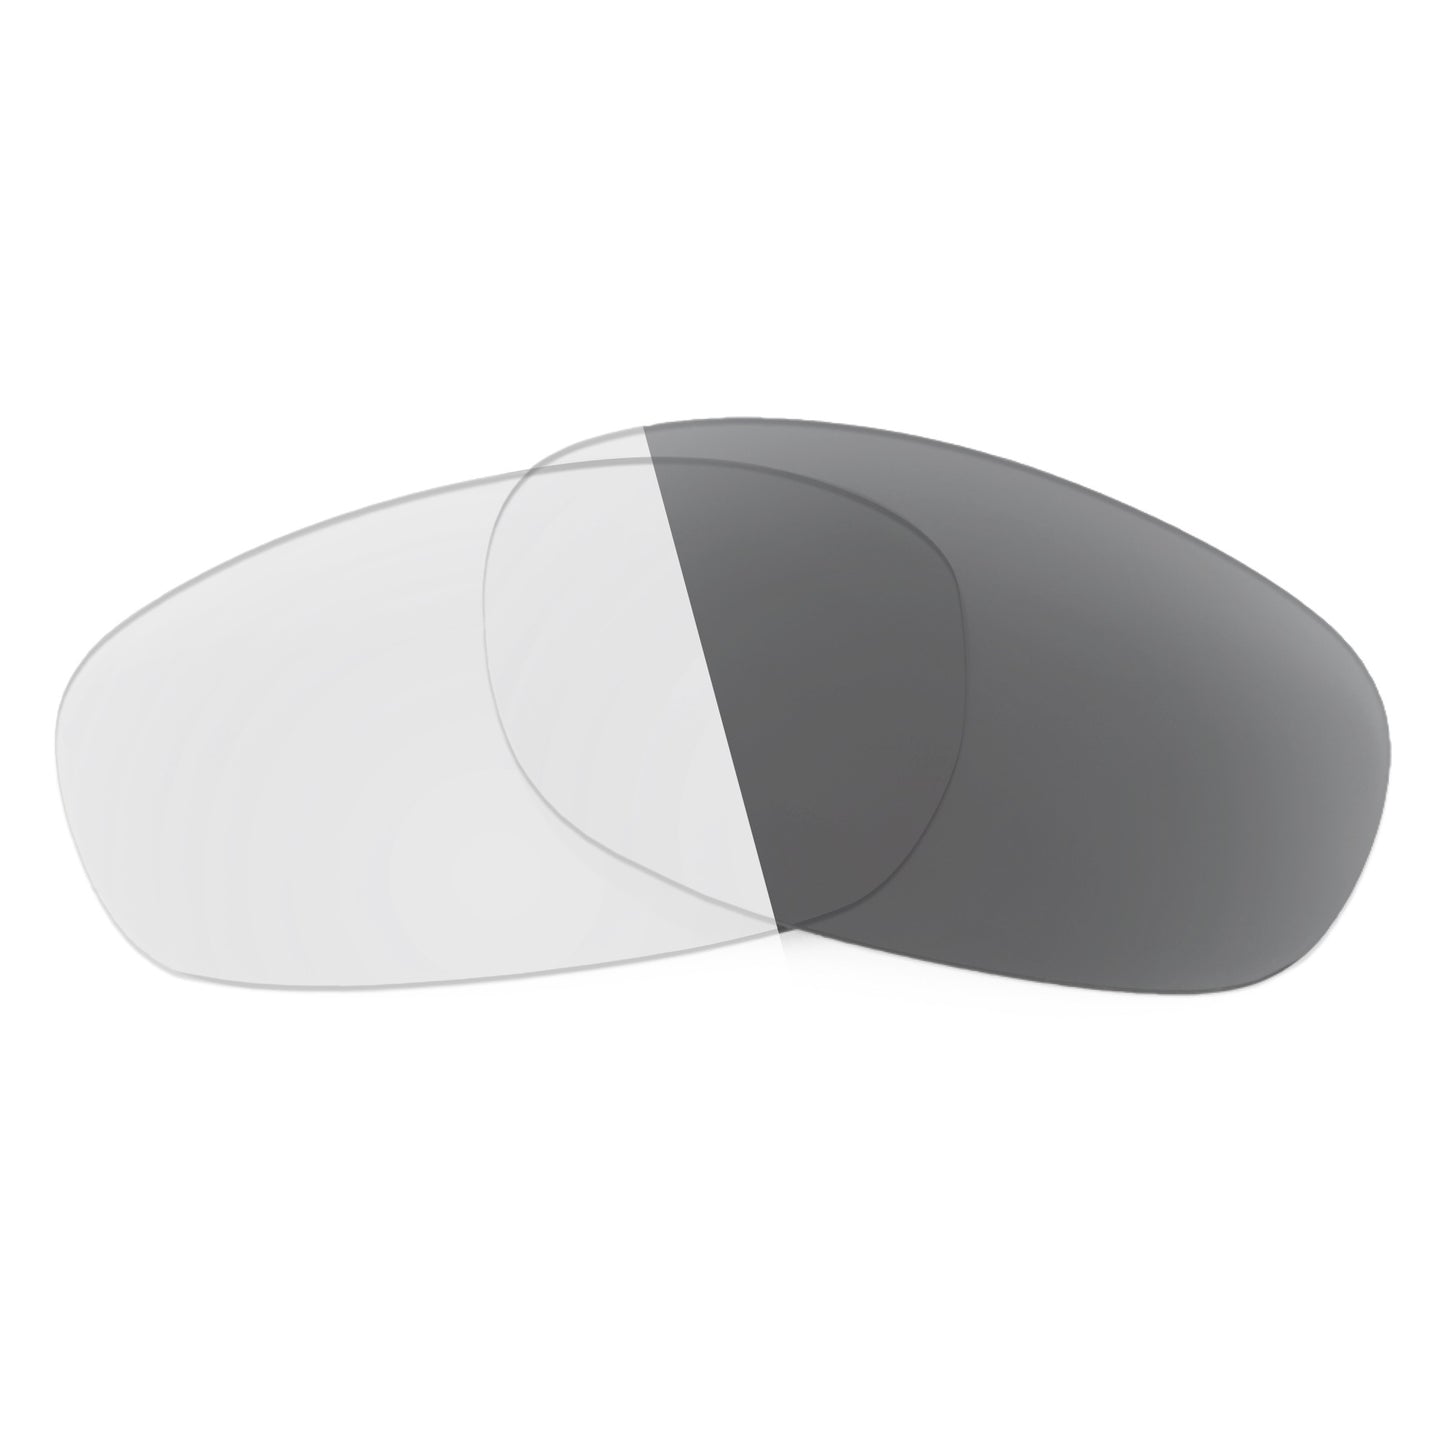 Revant replacement lenses for Ray-Ban Olympian RB3119 59mm Non-Polarized Adapt Gray Photochromic